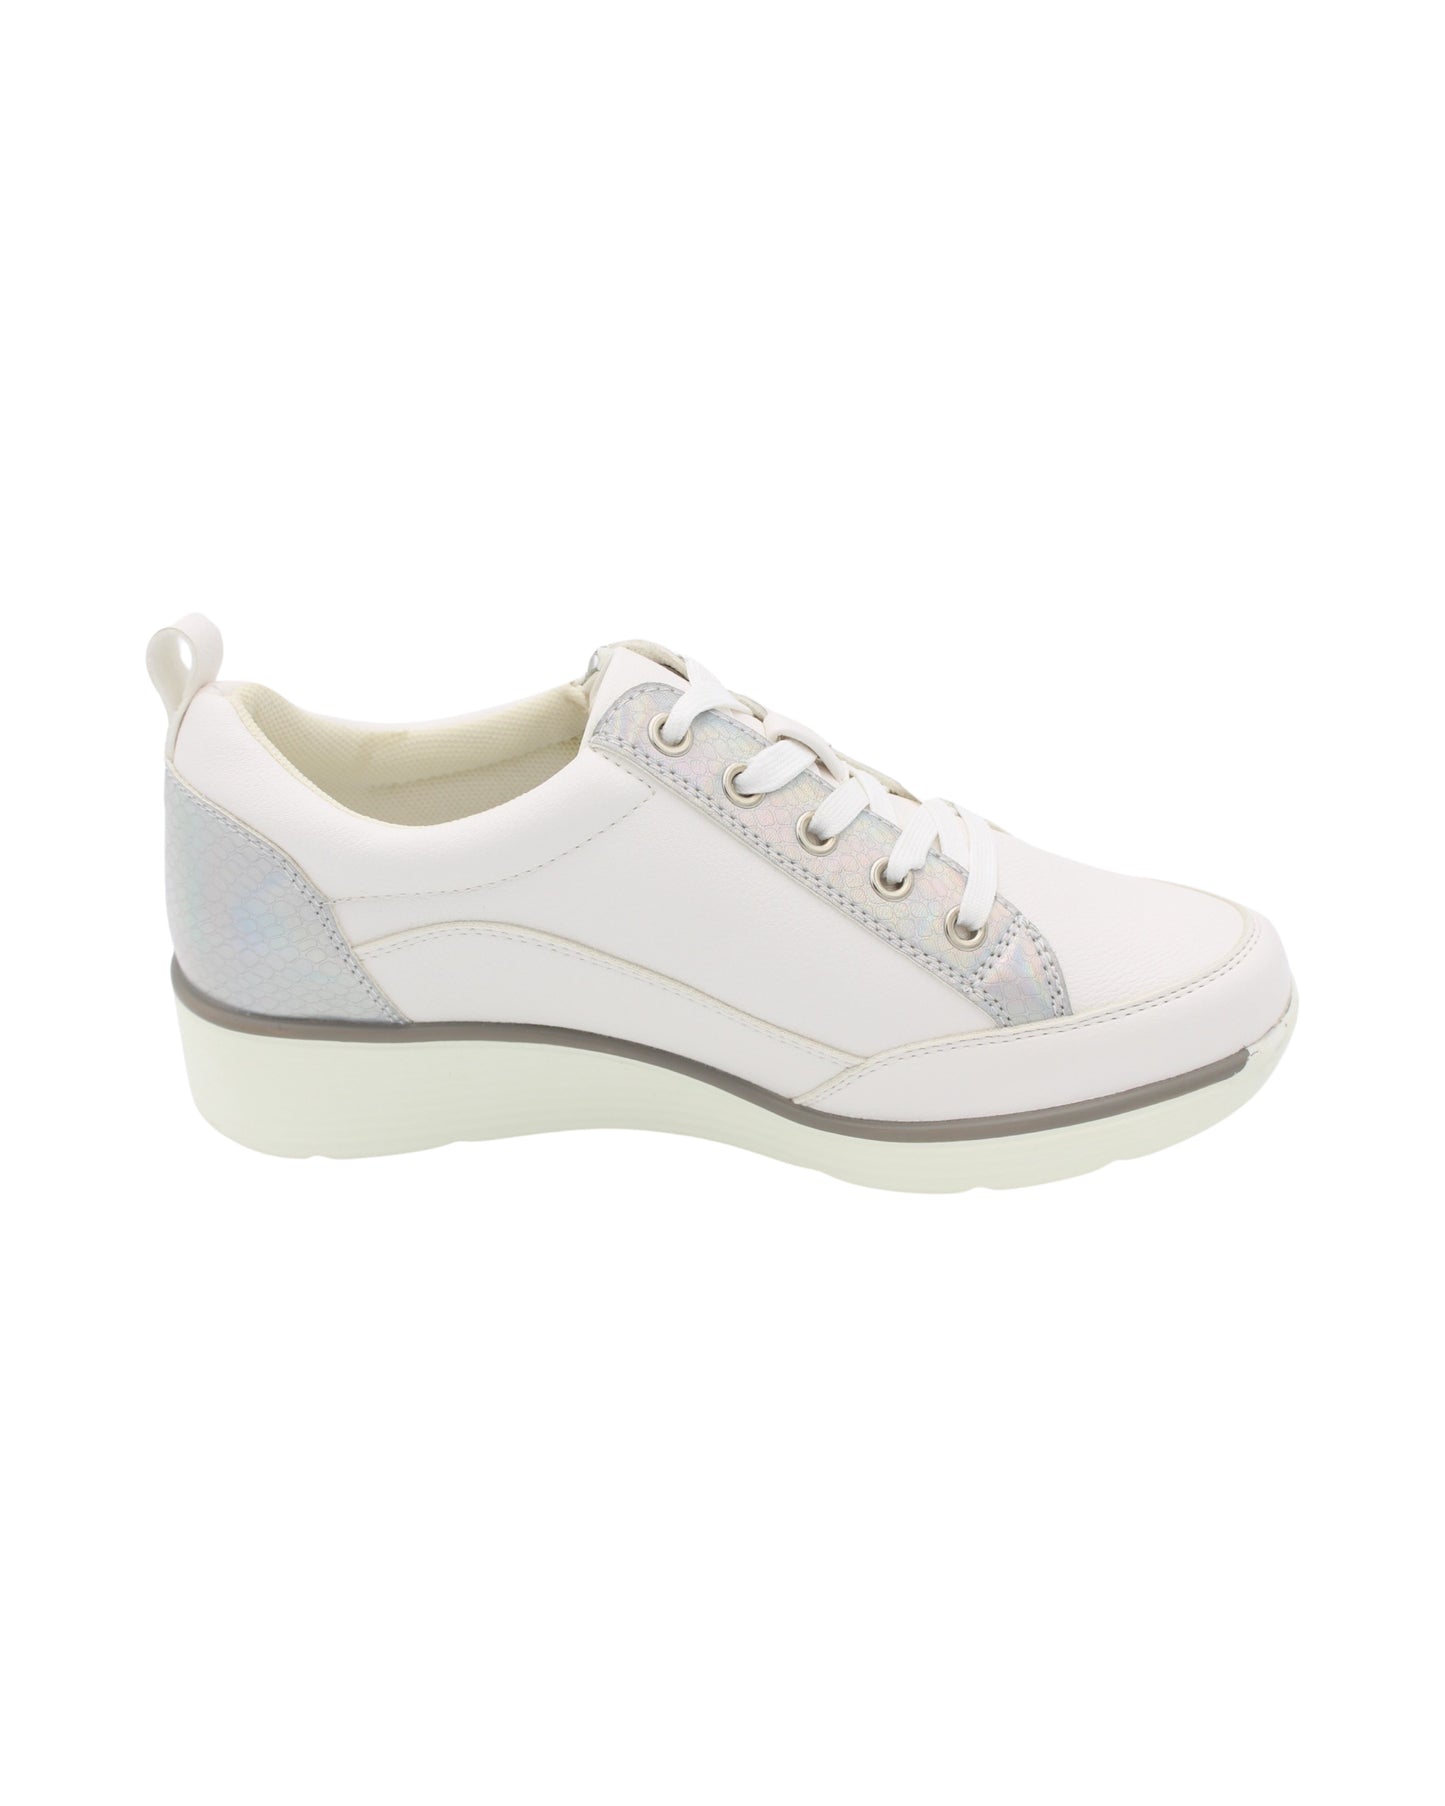 Lunar - Ladies Shoes Trainers White, Silver (2106)